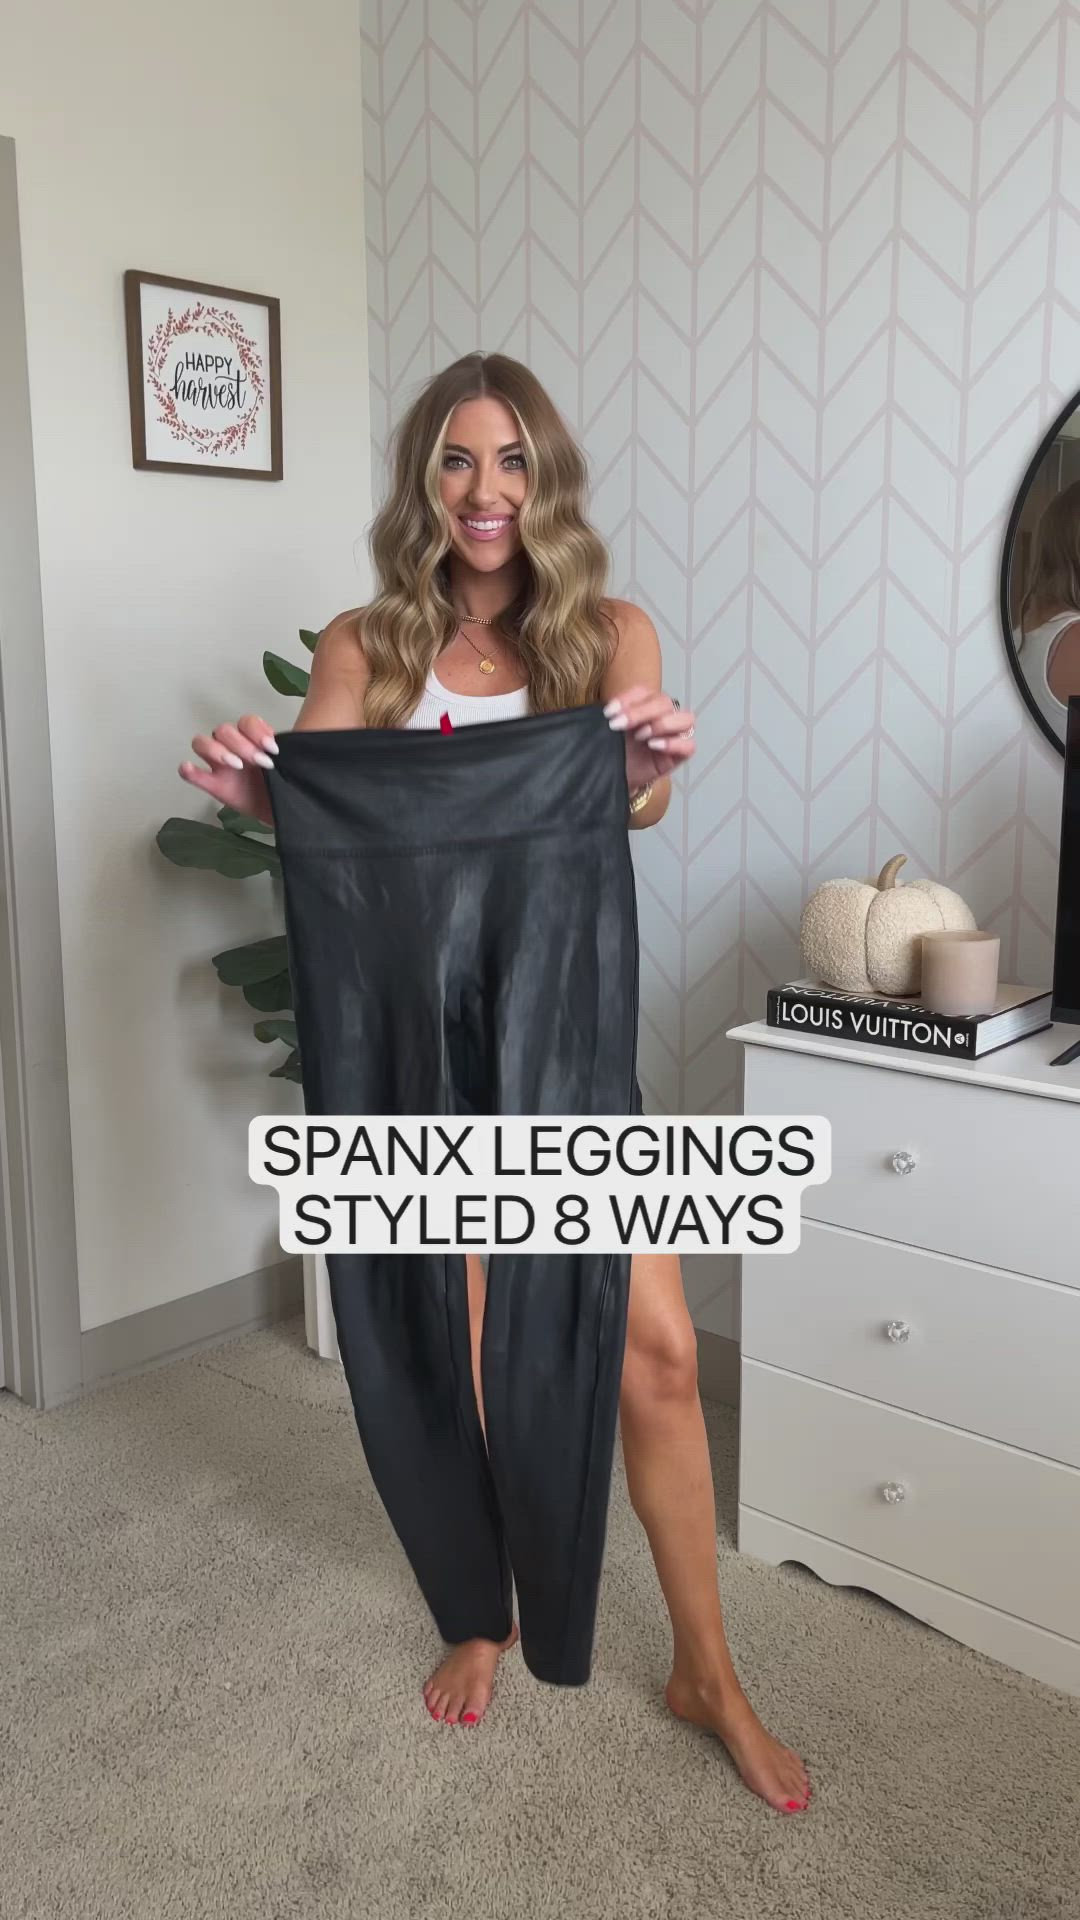 This contains an image of: SPANX LEGGINGS STYLED 8 WAYS